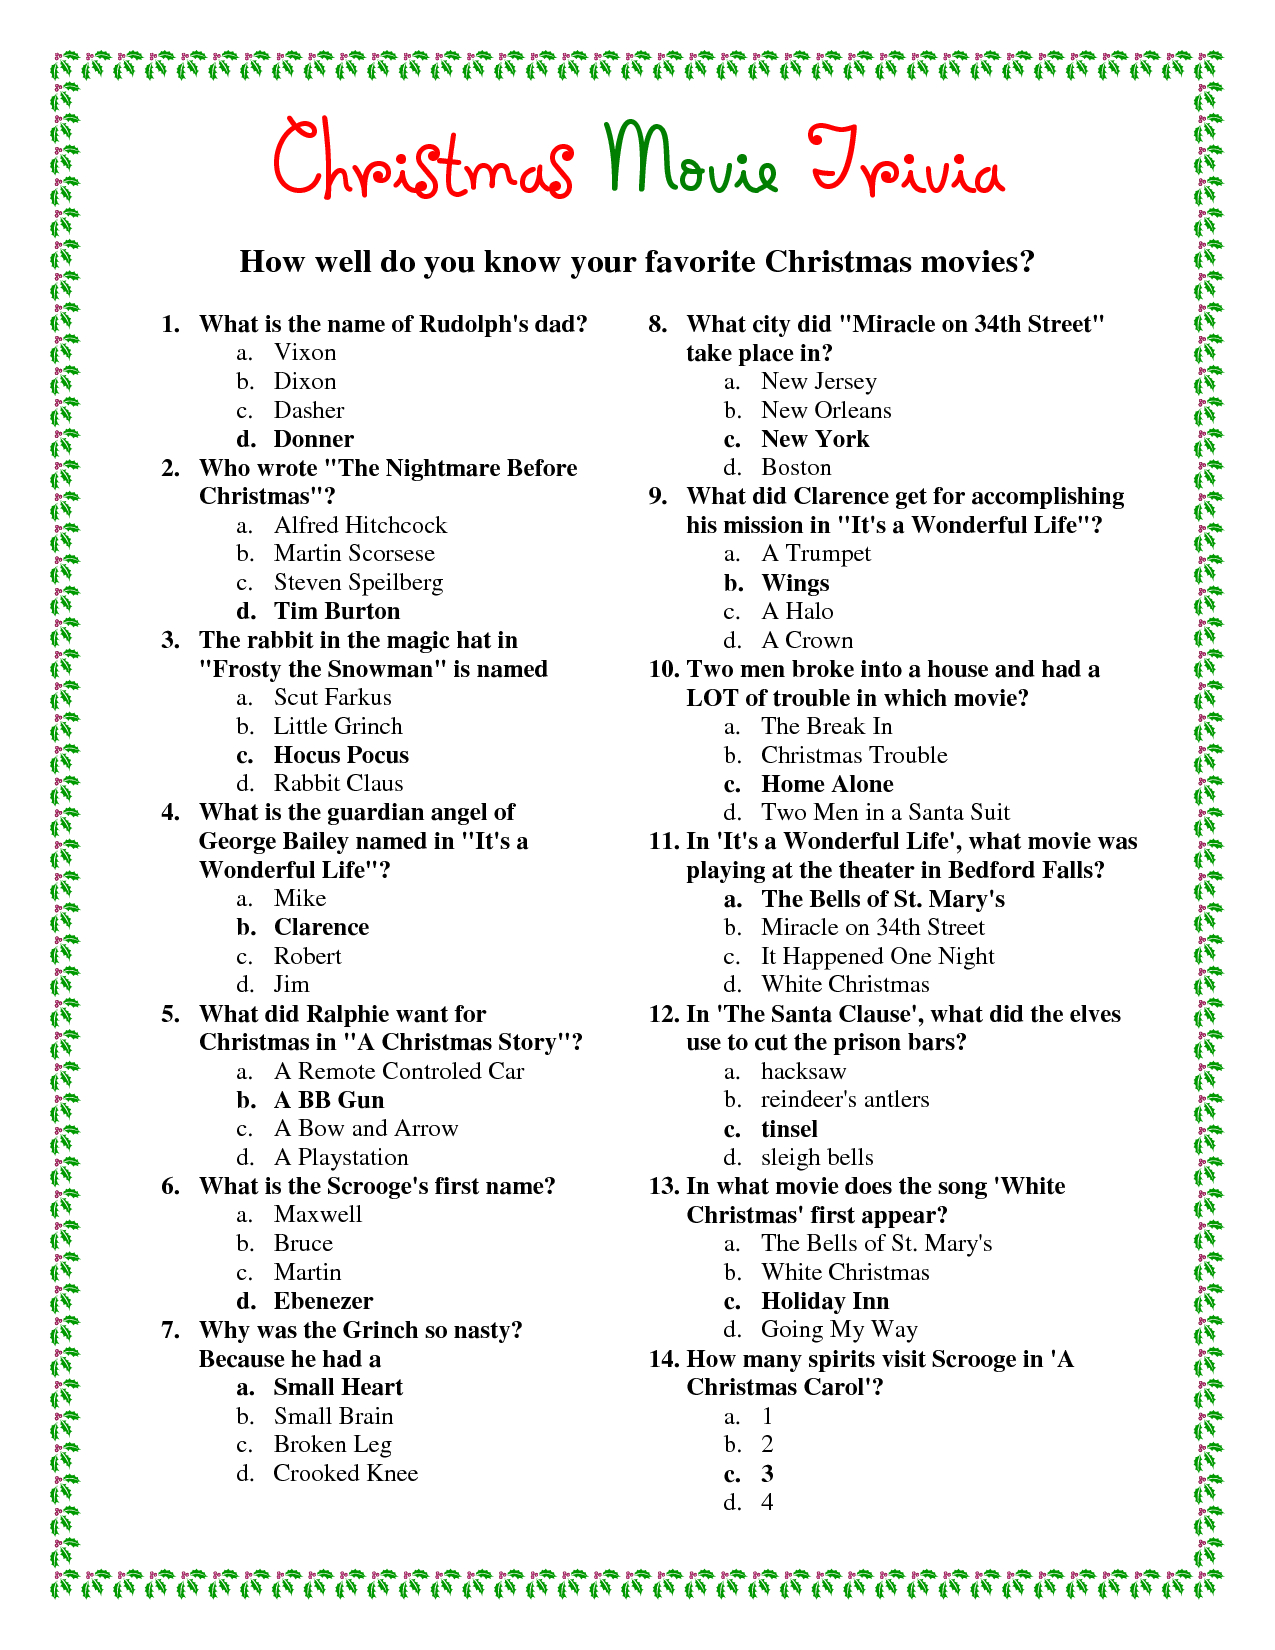 Ideas Collection Easy Christmas Trivia Questions And Answers - Free Printable Trivia Questions And Answers